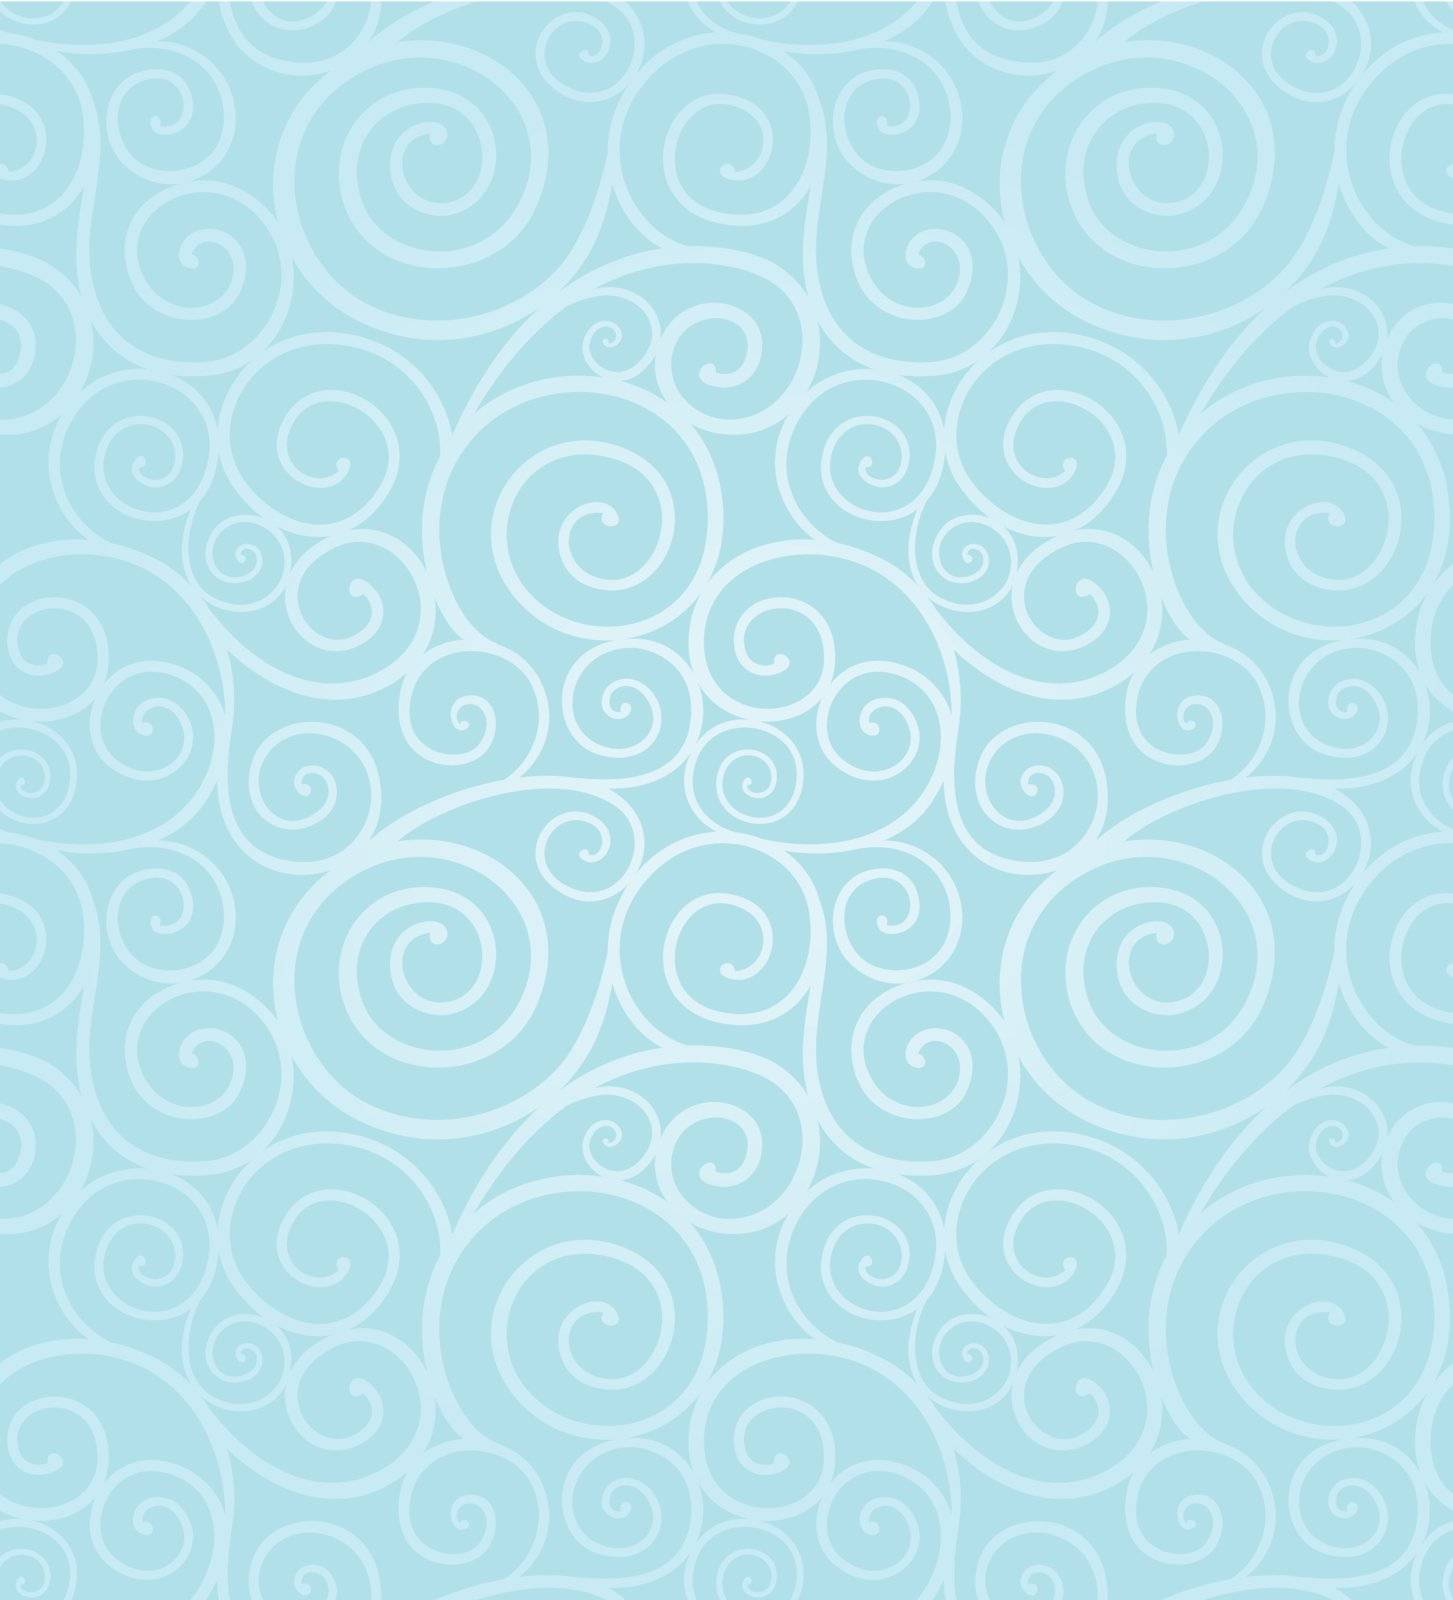 Abstract frosty winter swirl seamless composition made of spirals